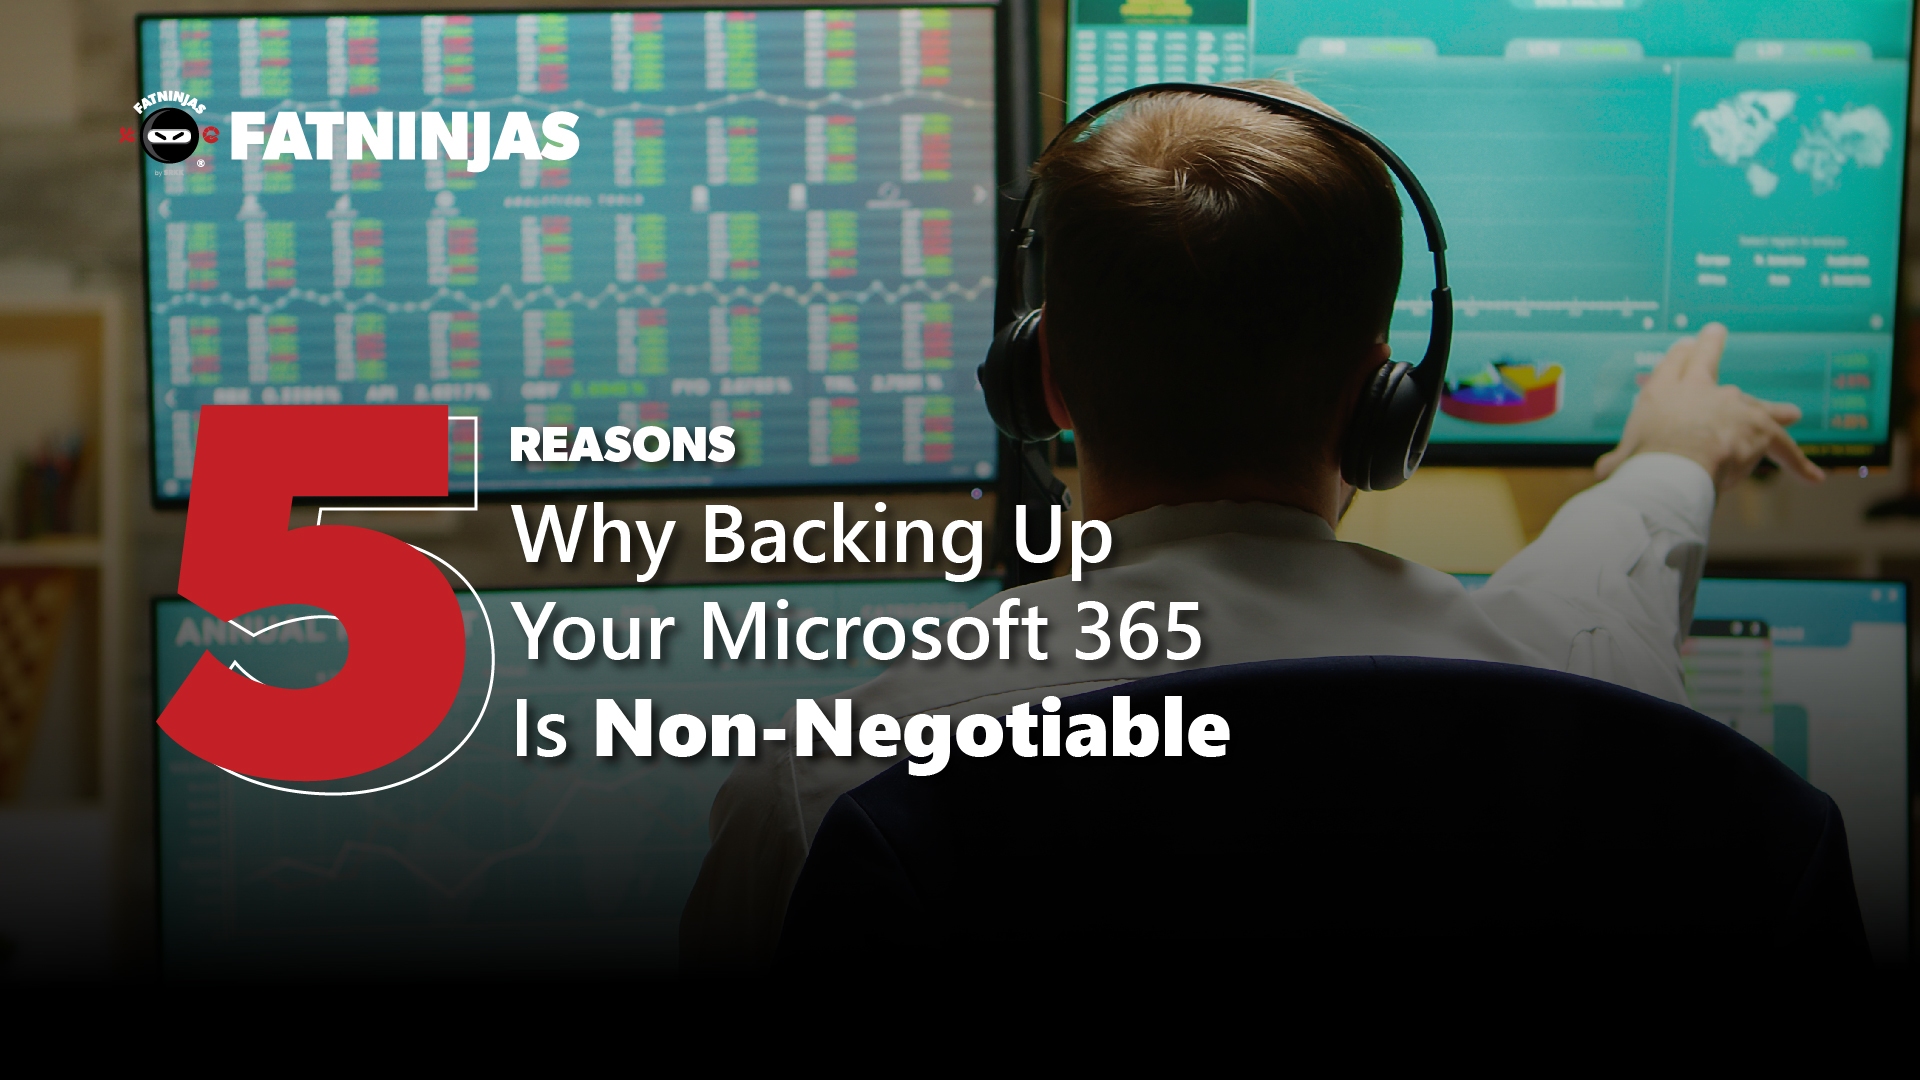 5 Reasons Why Backing Up Your Microsoft 365 Is Non-Negotiable